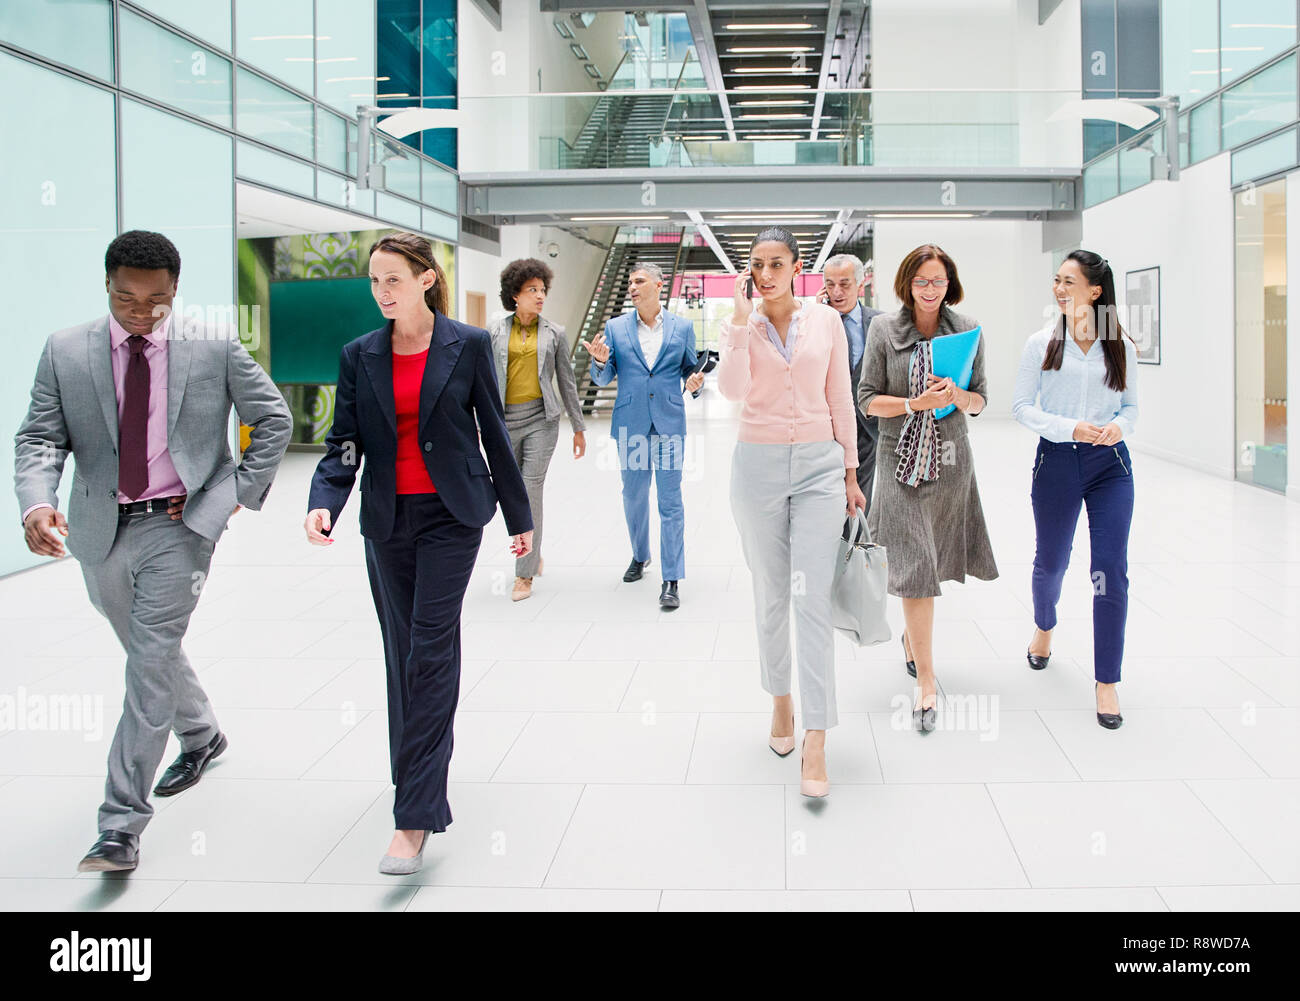 Business people walking in modern office atrium lobby Stock Photo